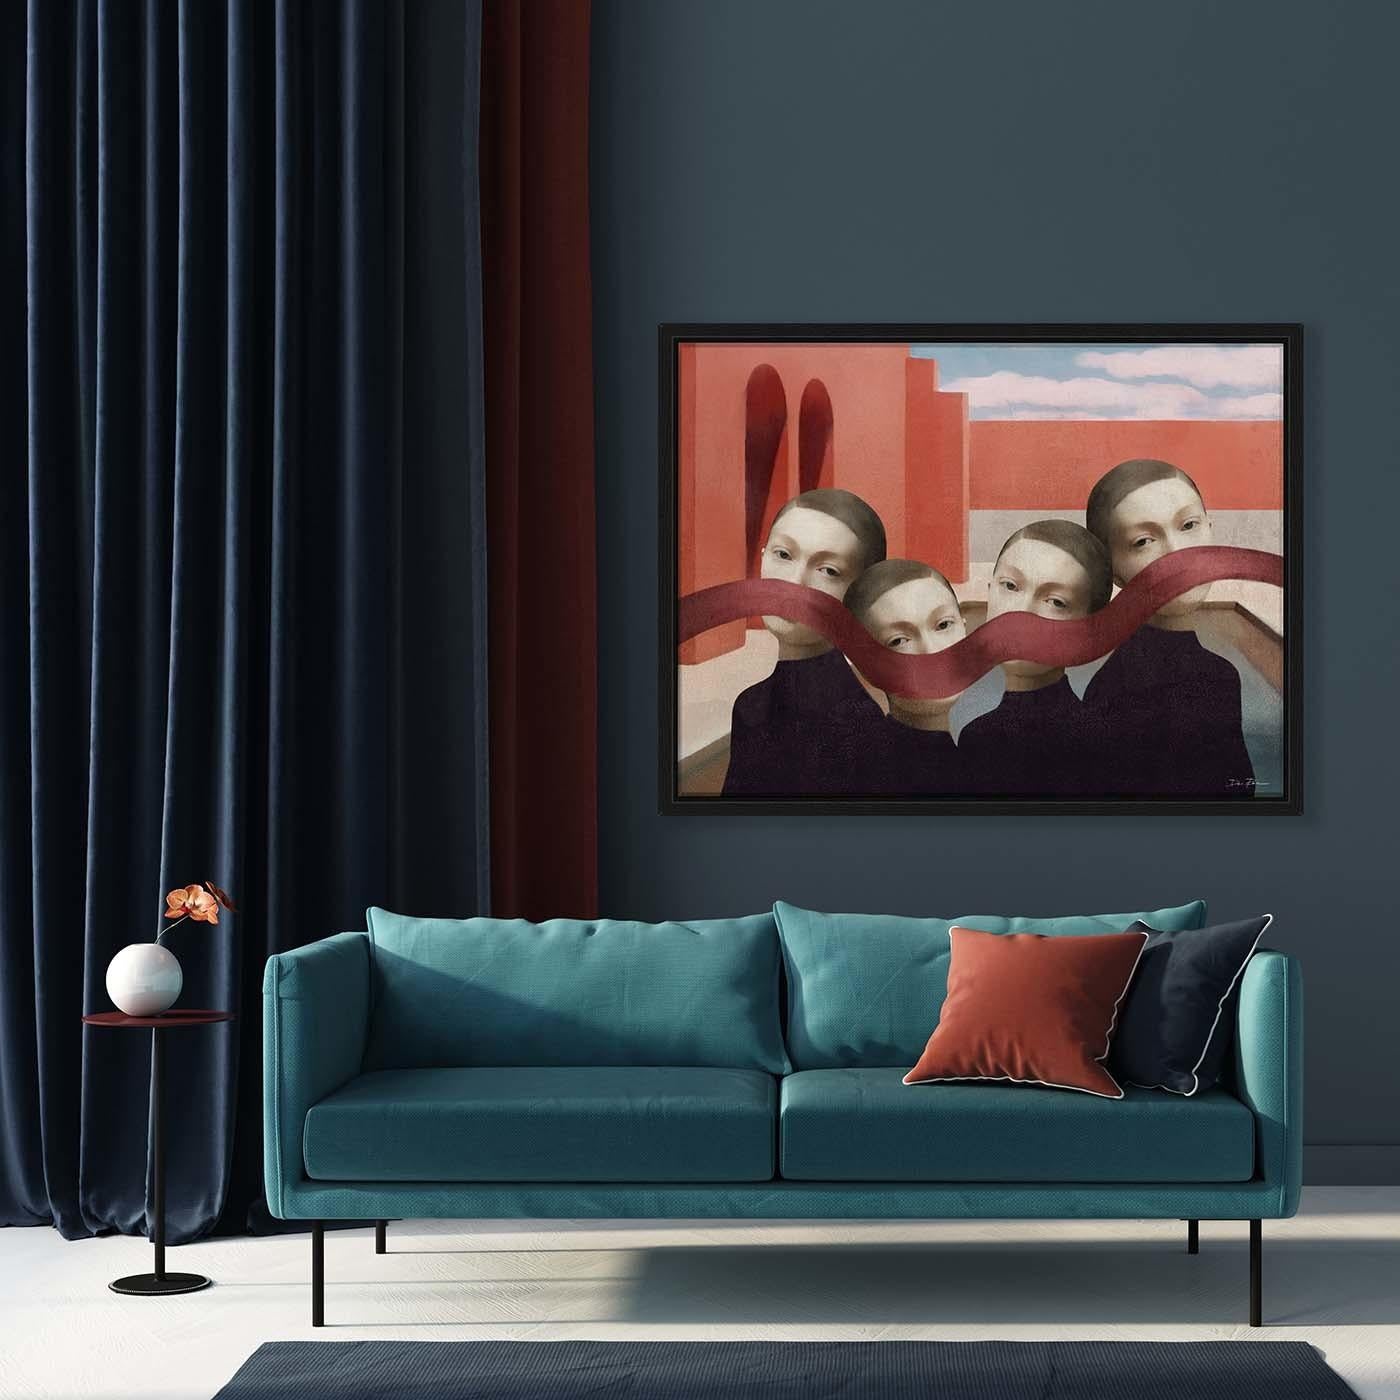 This digital painting is a Pop-Surrealist exploration of the 2020 coronavirus pandemic. It depicts four young girls boxed in by their architectural environs, while a red band covers their mouths and noses, allowing only their suffering gaze to break